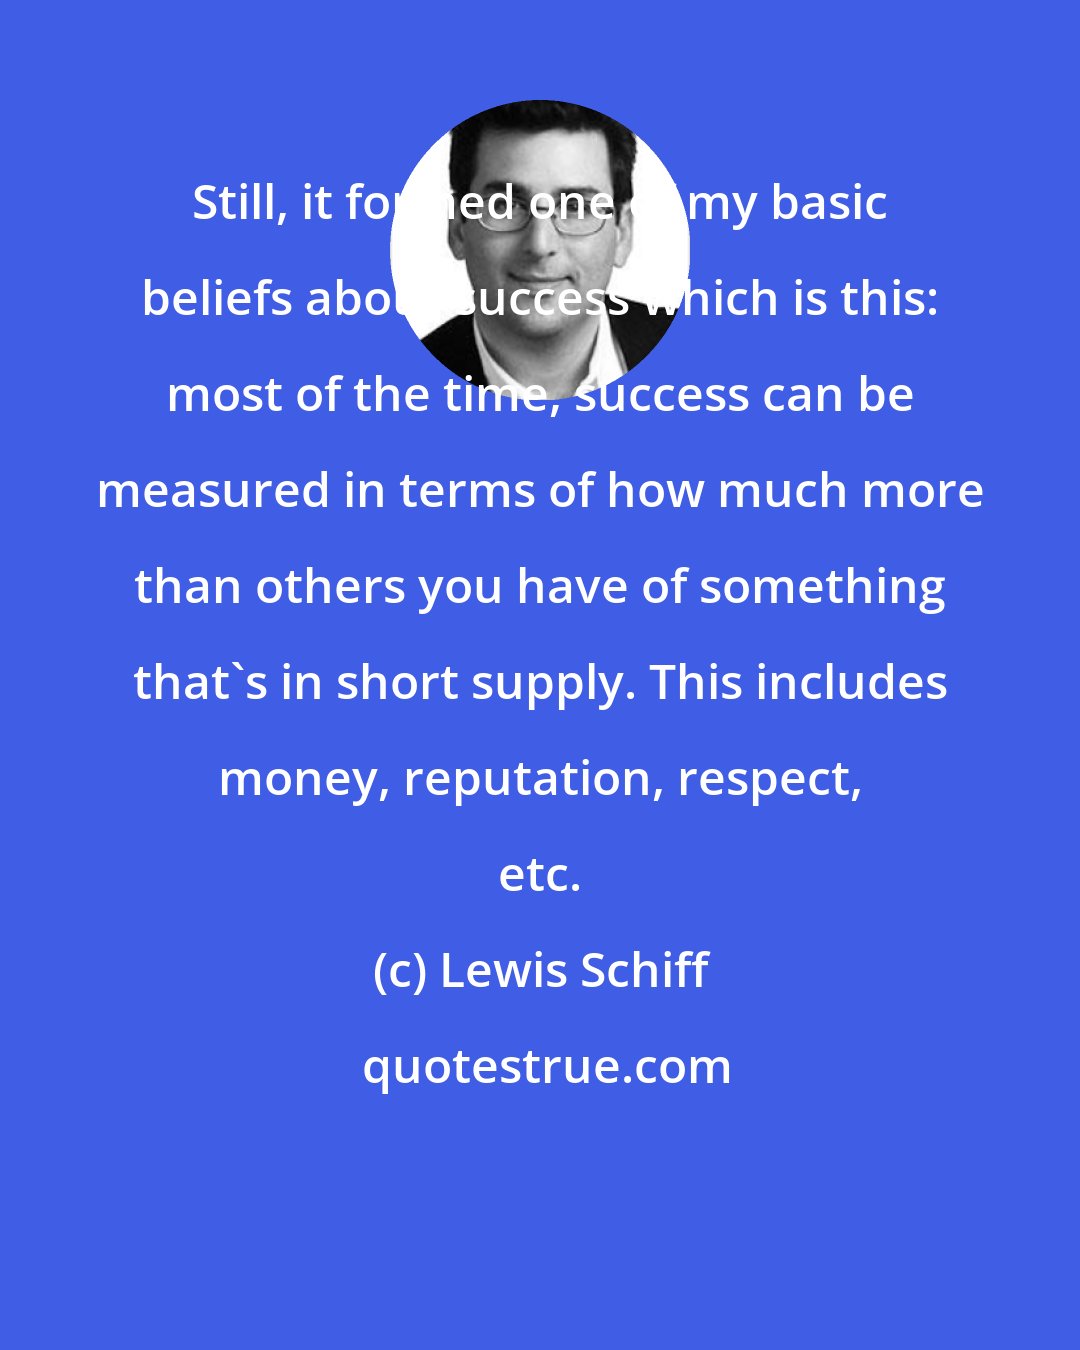 Lewis Schiff: Still, it formed one of my basic beliefs about success which is this: most of the time, success can be measured in terms of how much more than others you have of something that's in short supply. This includes money, reputation, respect, etc.